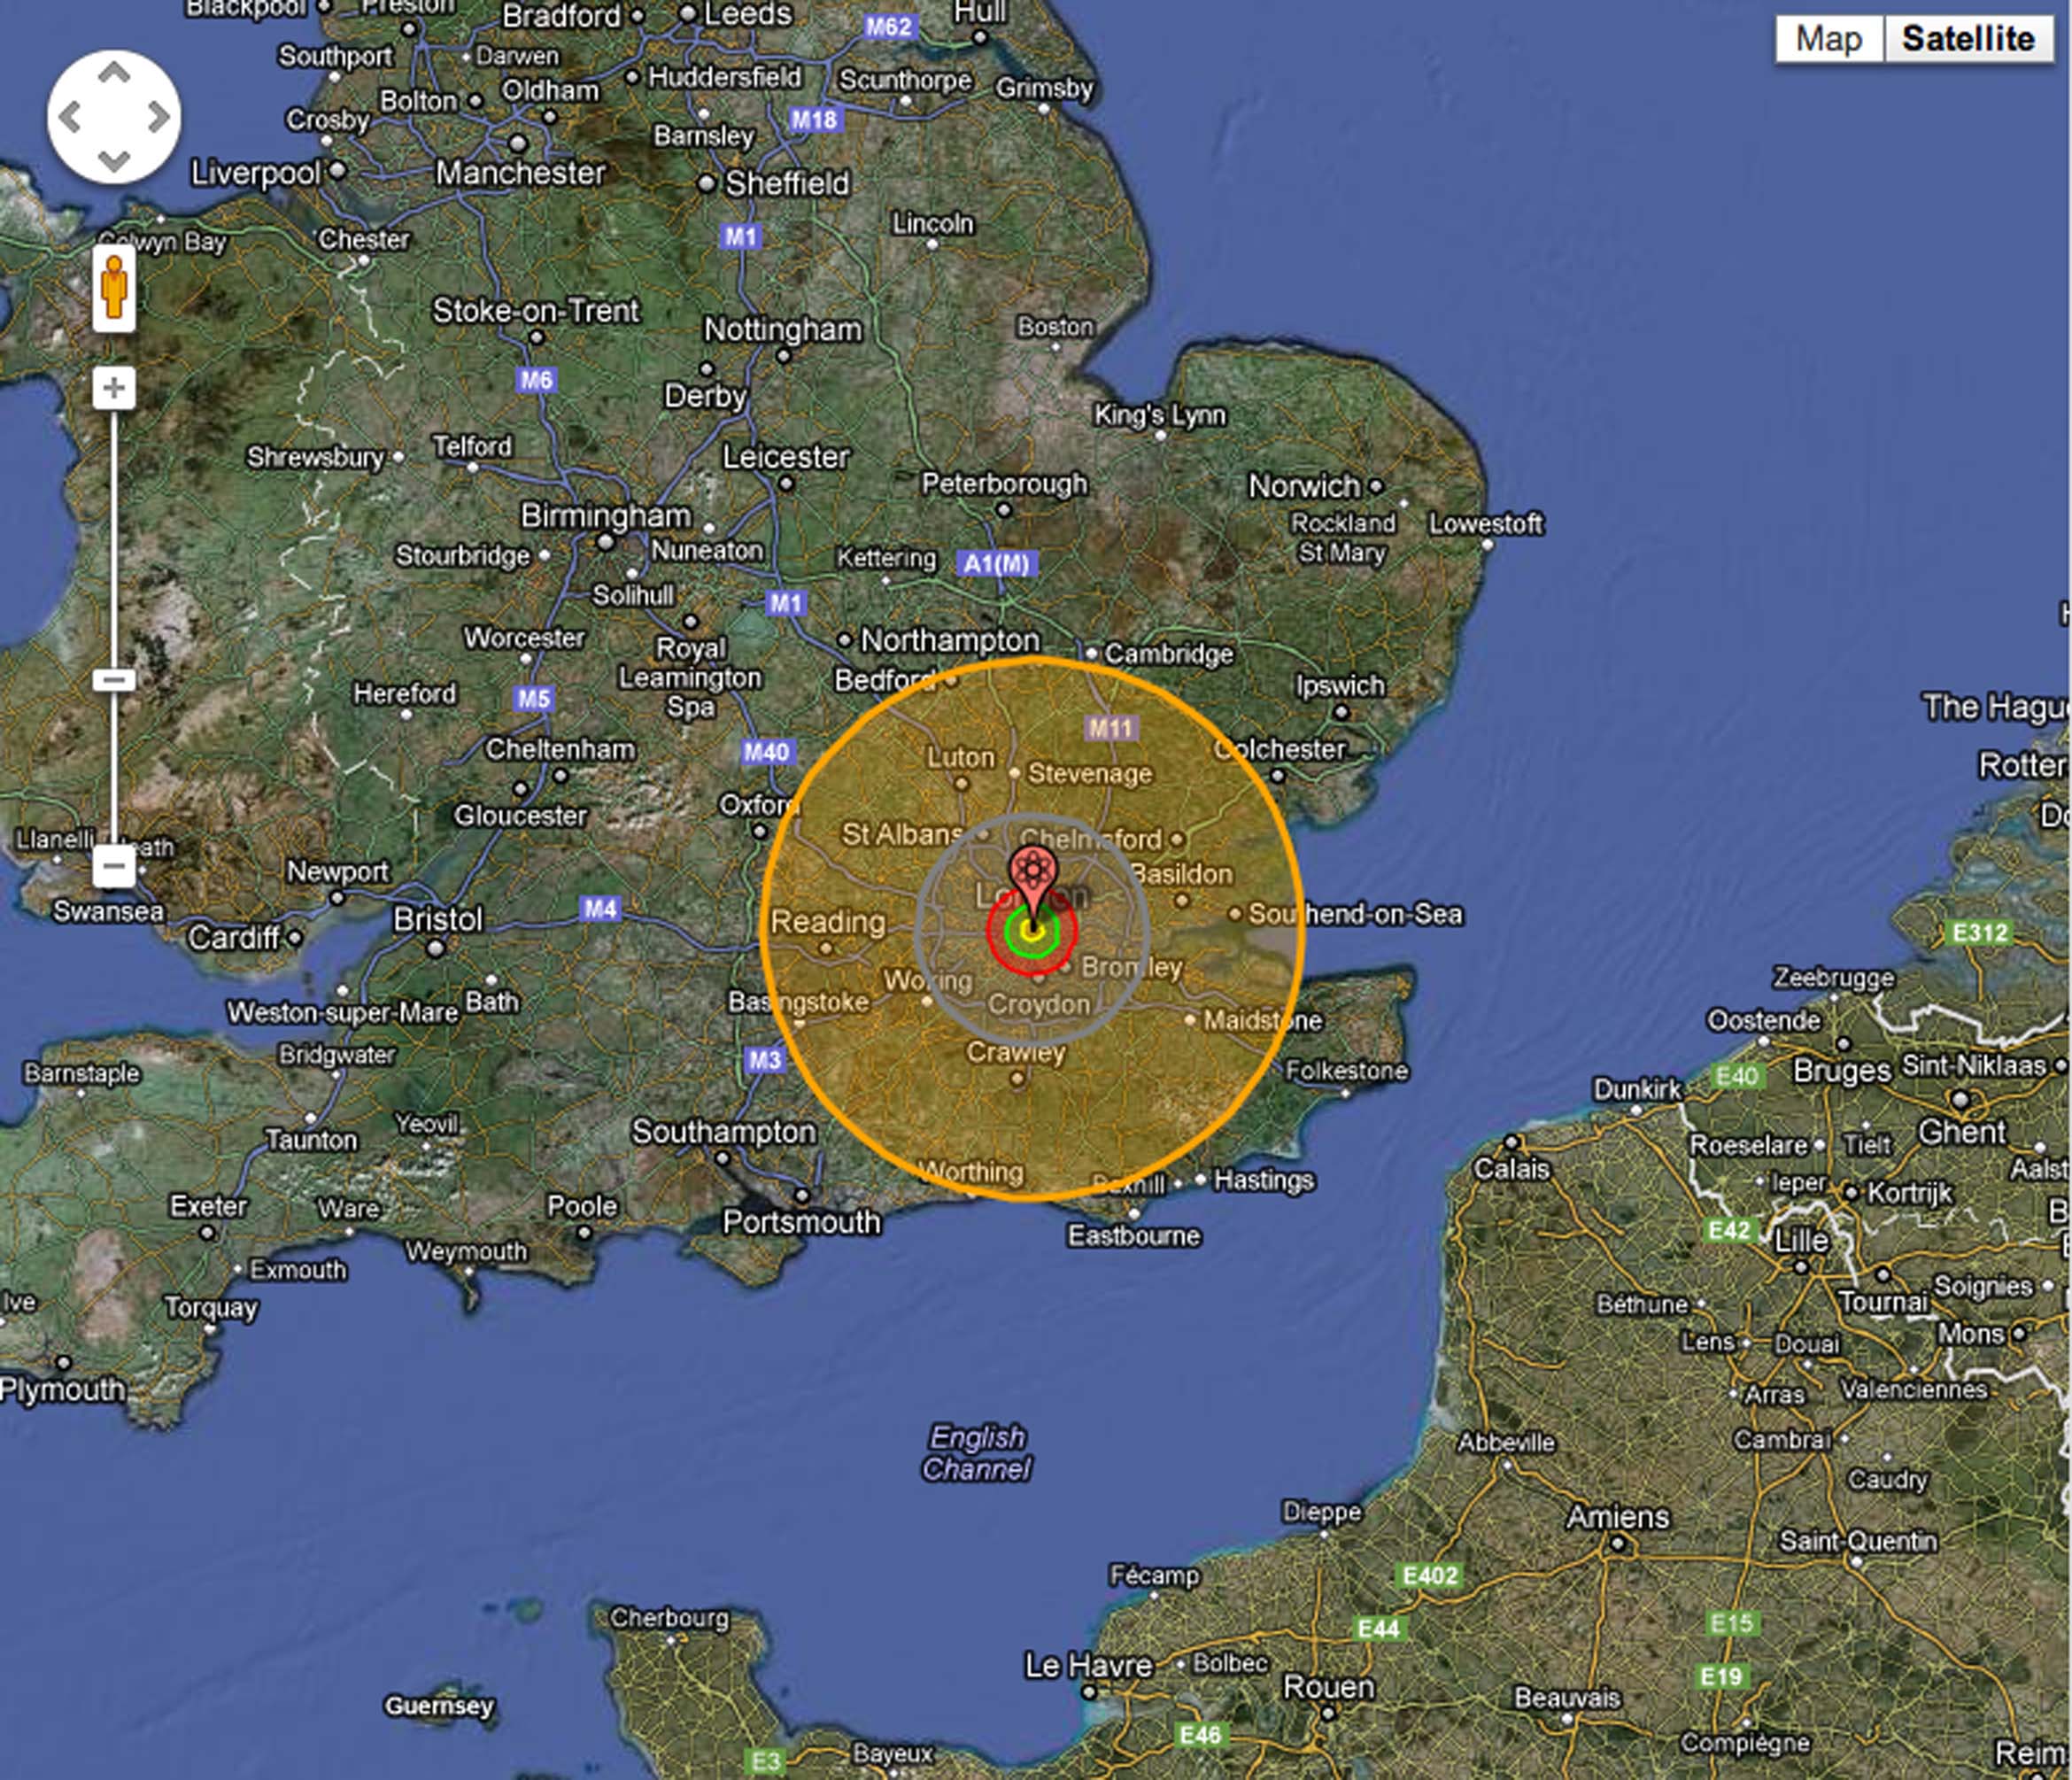 ‘Nuke map’ shows true scale of nuclear war